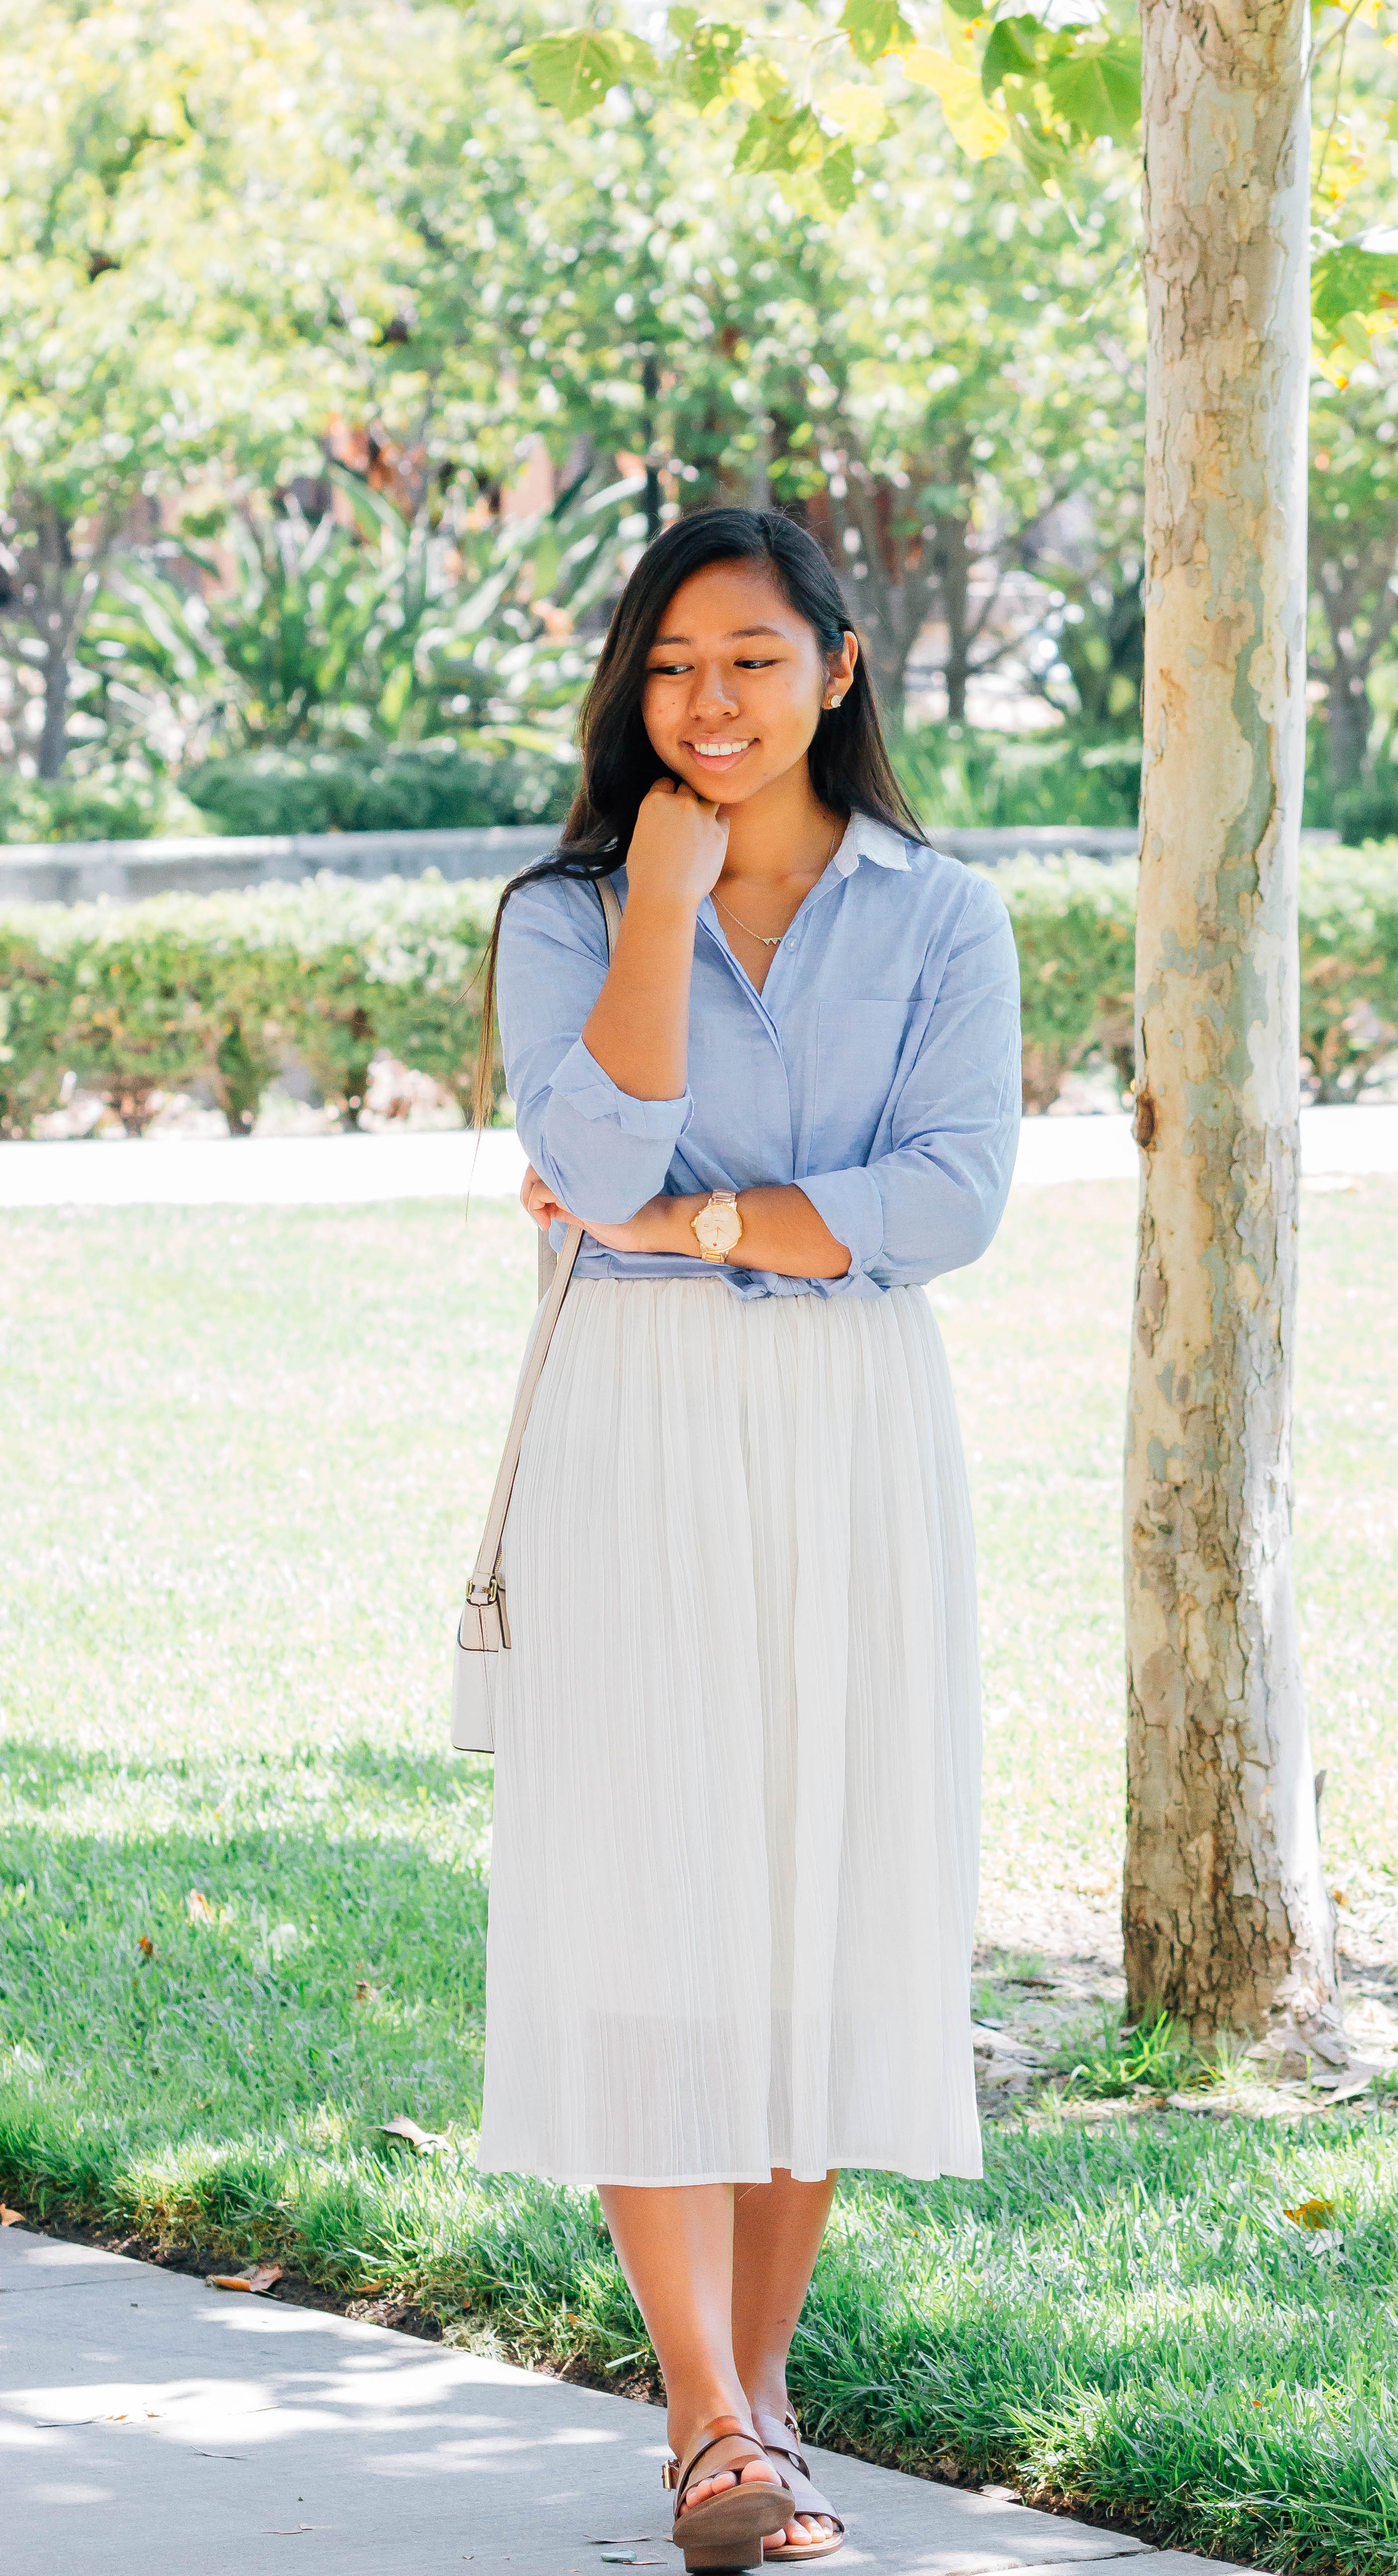 Cool in a chambray shirt, white skirt, brown sandals | A Letter to My High School Self | High school tips and advice